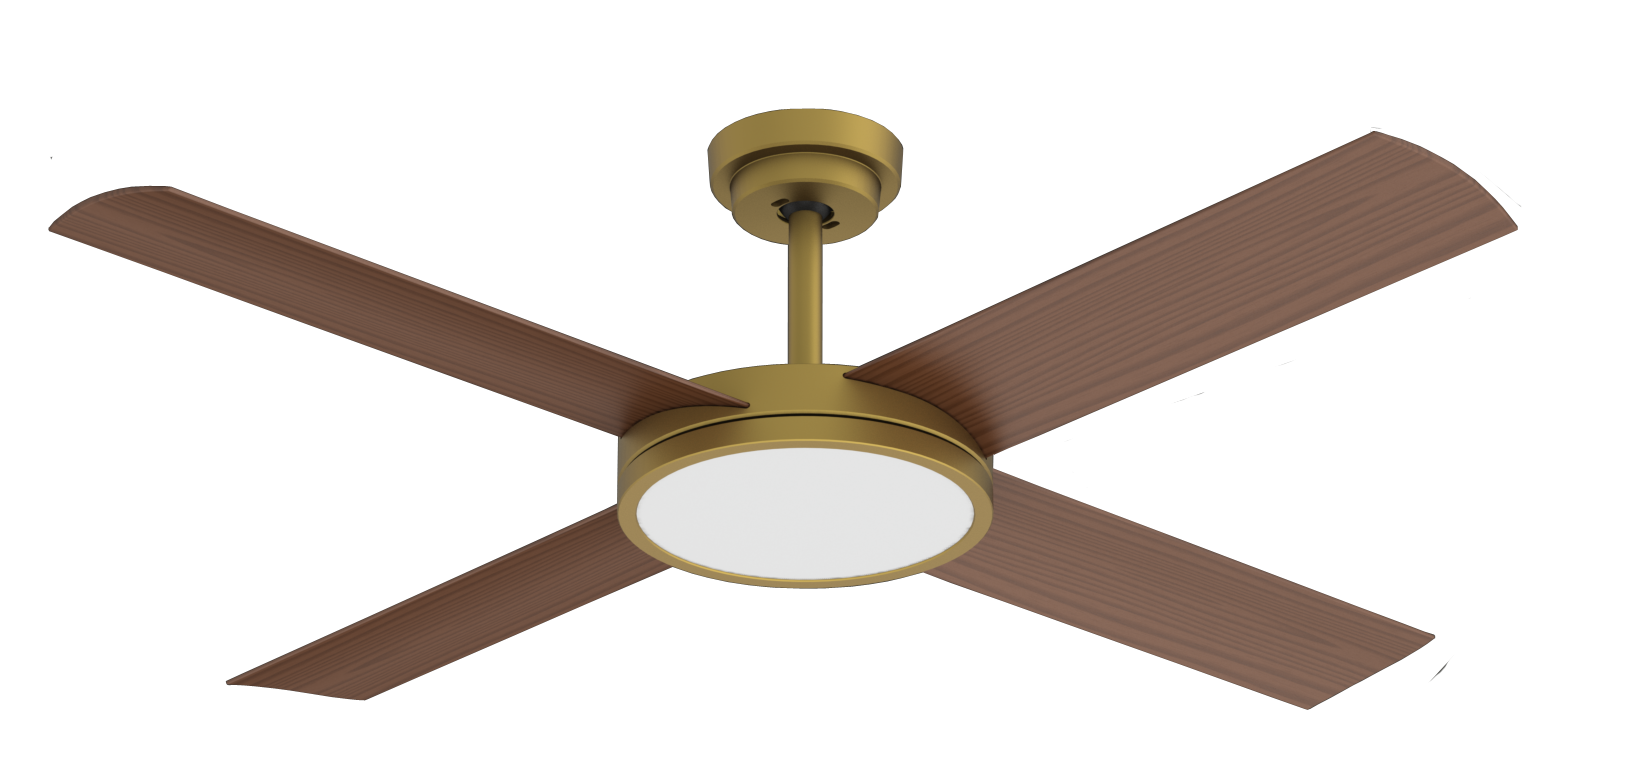 Revolution 3 with 24W LED Light (Dimmable) 52” Ceiling Fan - Antique with Koa Blades